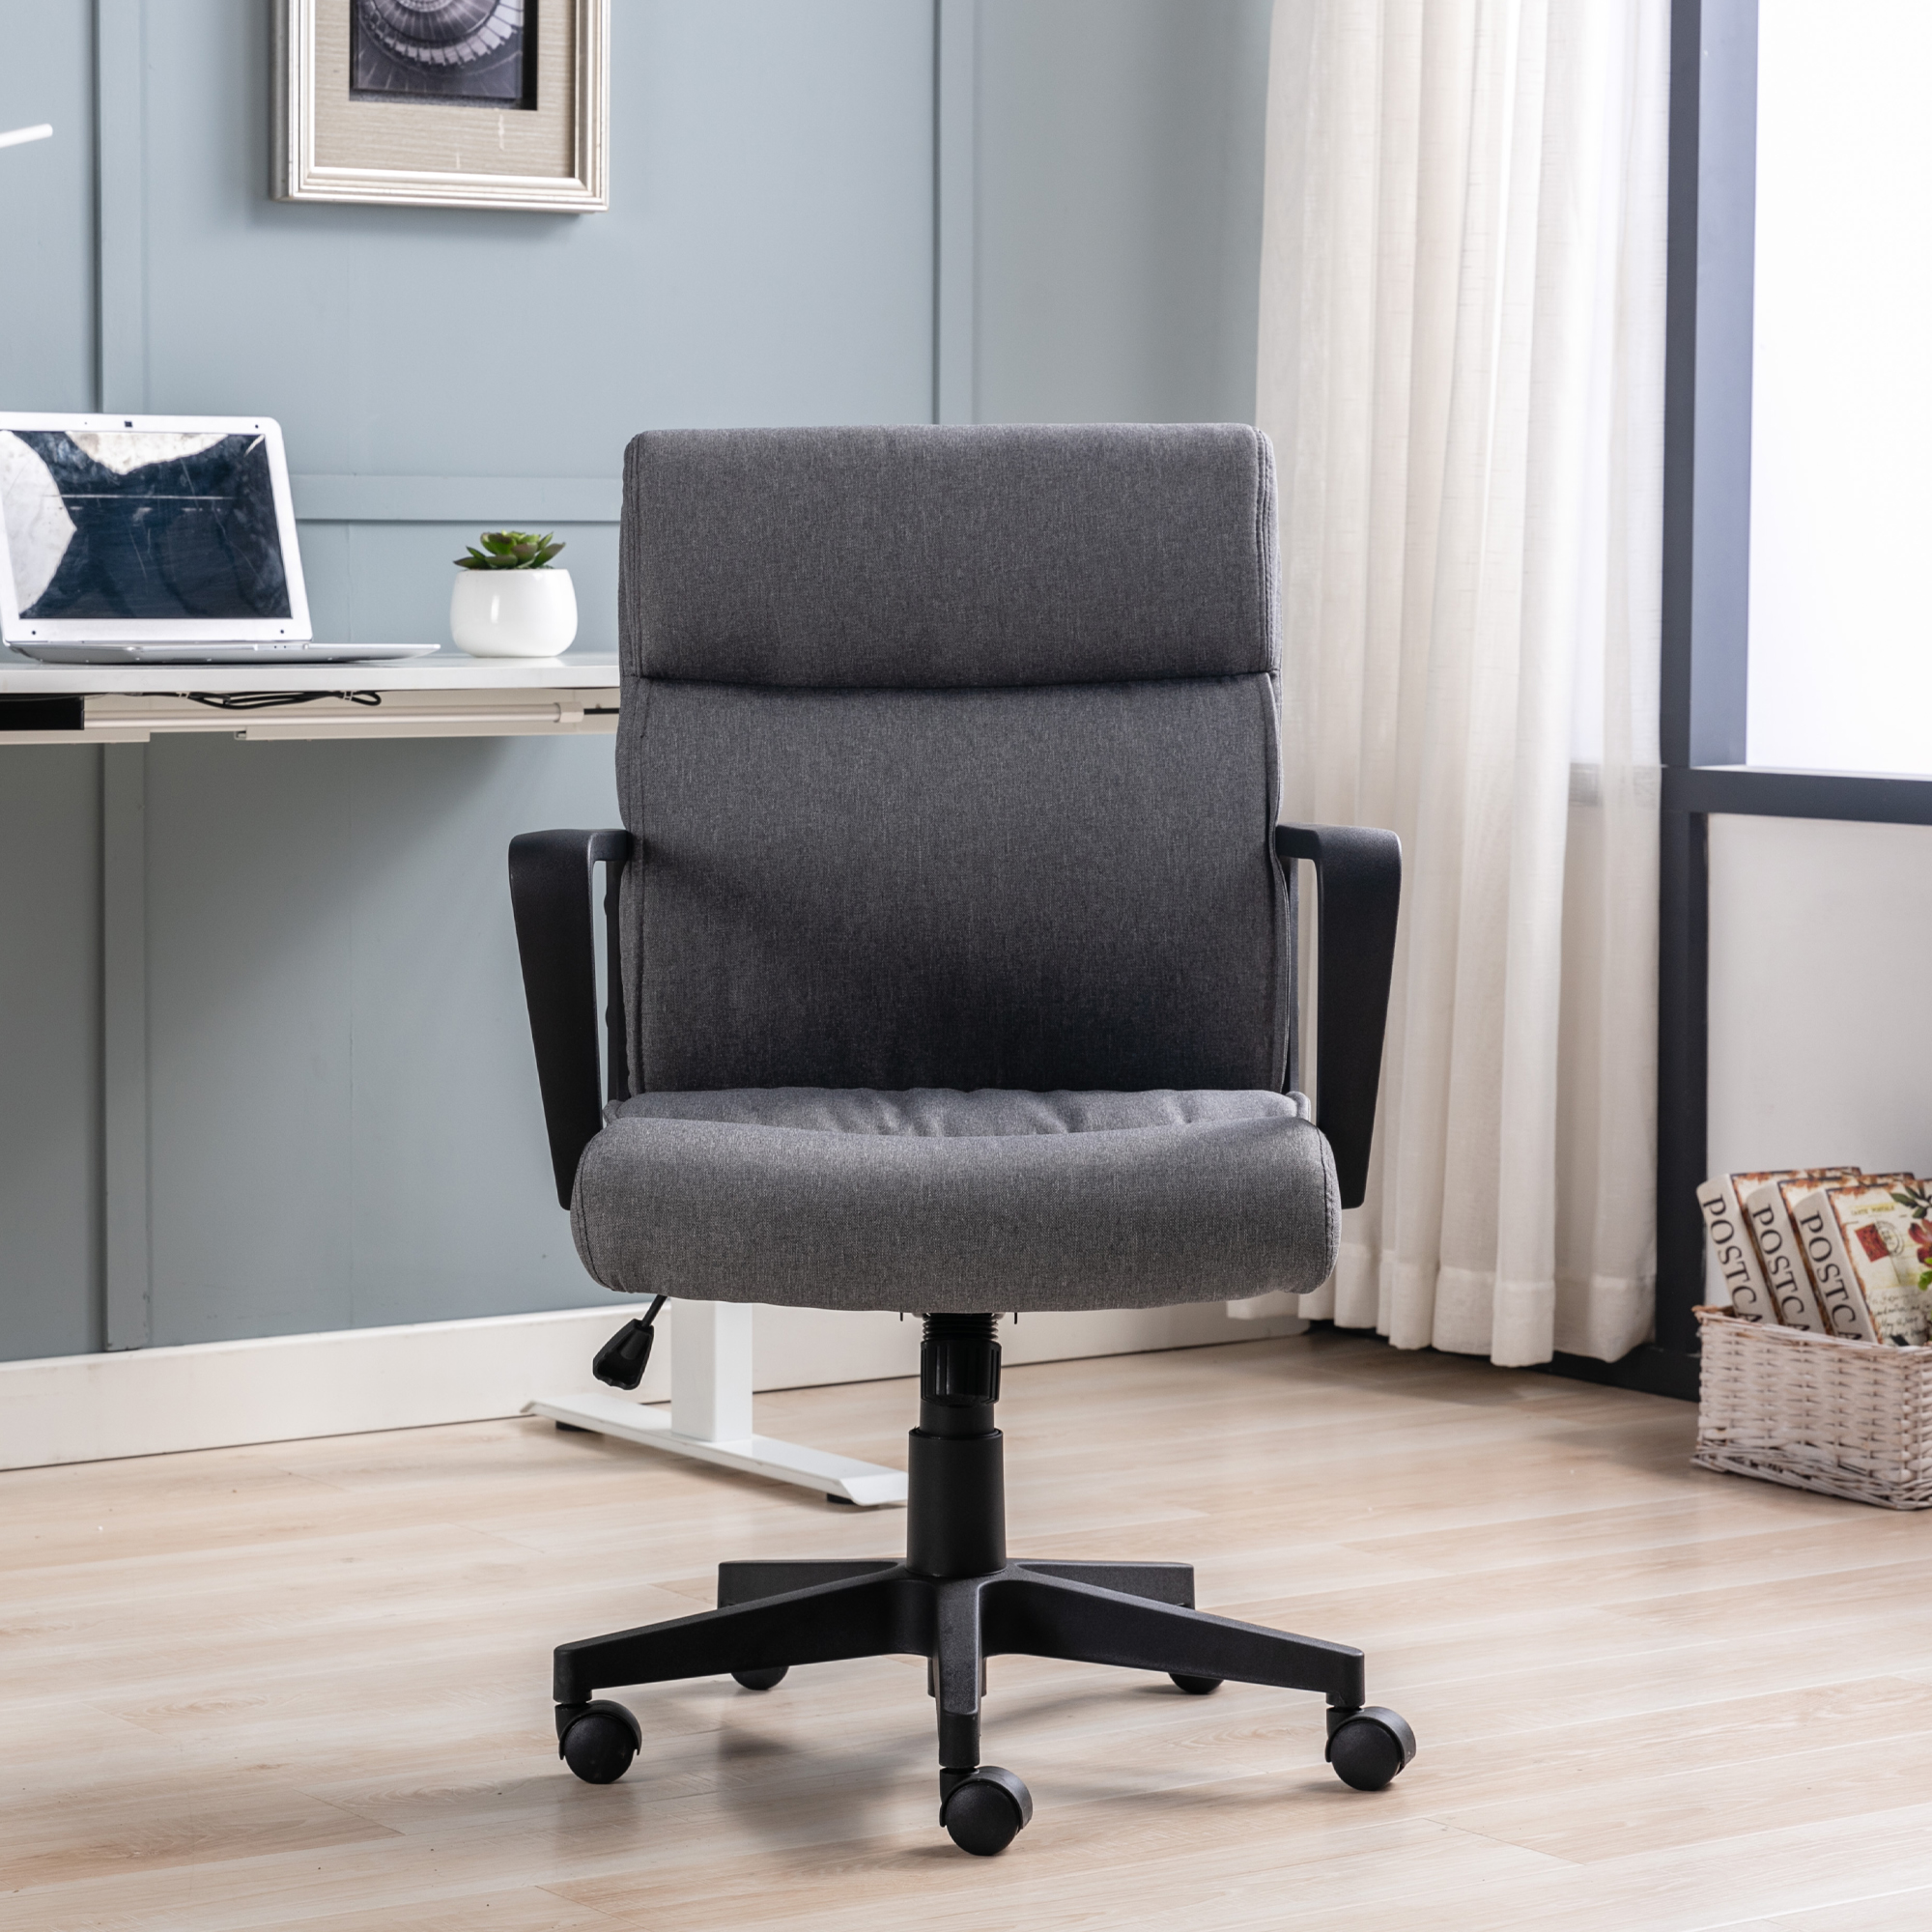 Hengming Office Chair Spring Cushion Mid Back Executive Desk Fabric Chair with PP Arms 360 Swivel Task Chair-CASAINC